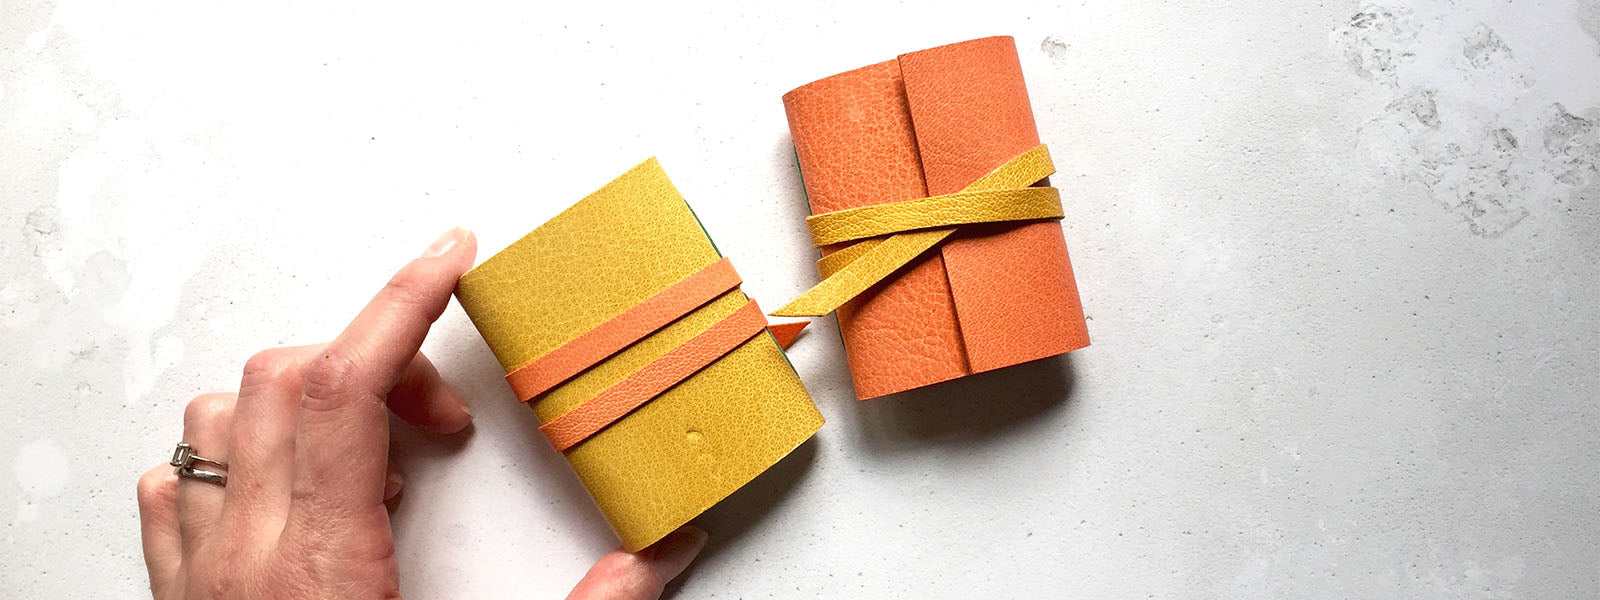 Miniature Journals bound in peach and yellow leather, a little notebook desk accessory stationery gift handmade in the UK